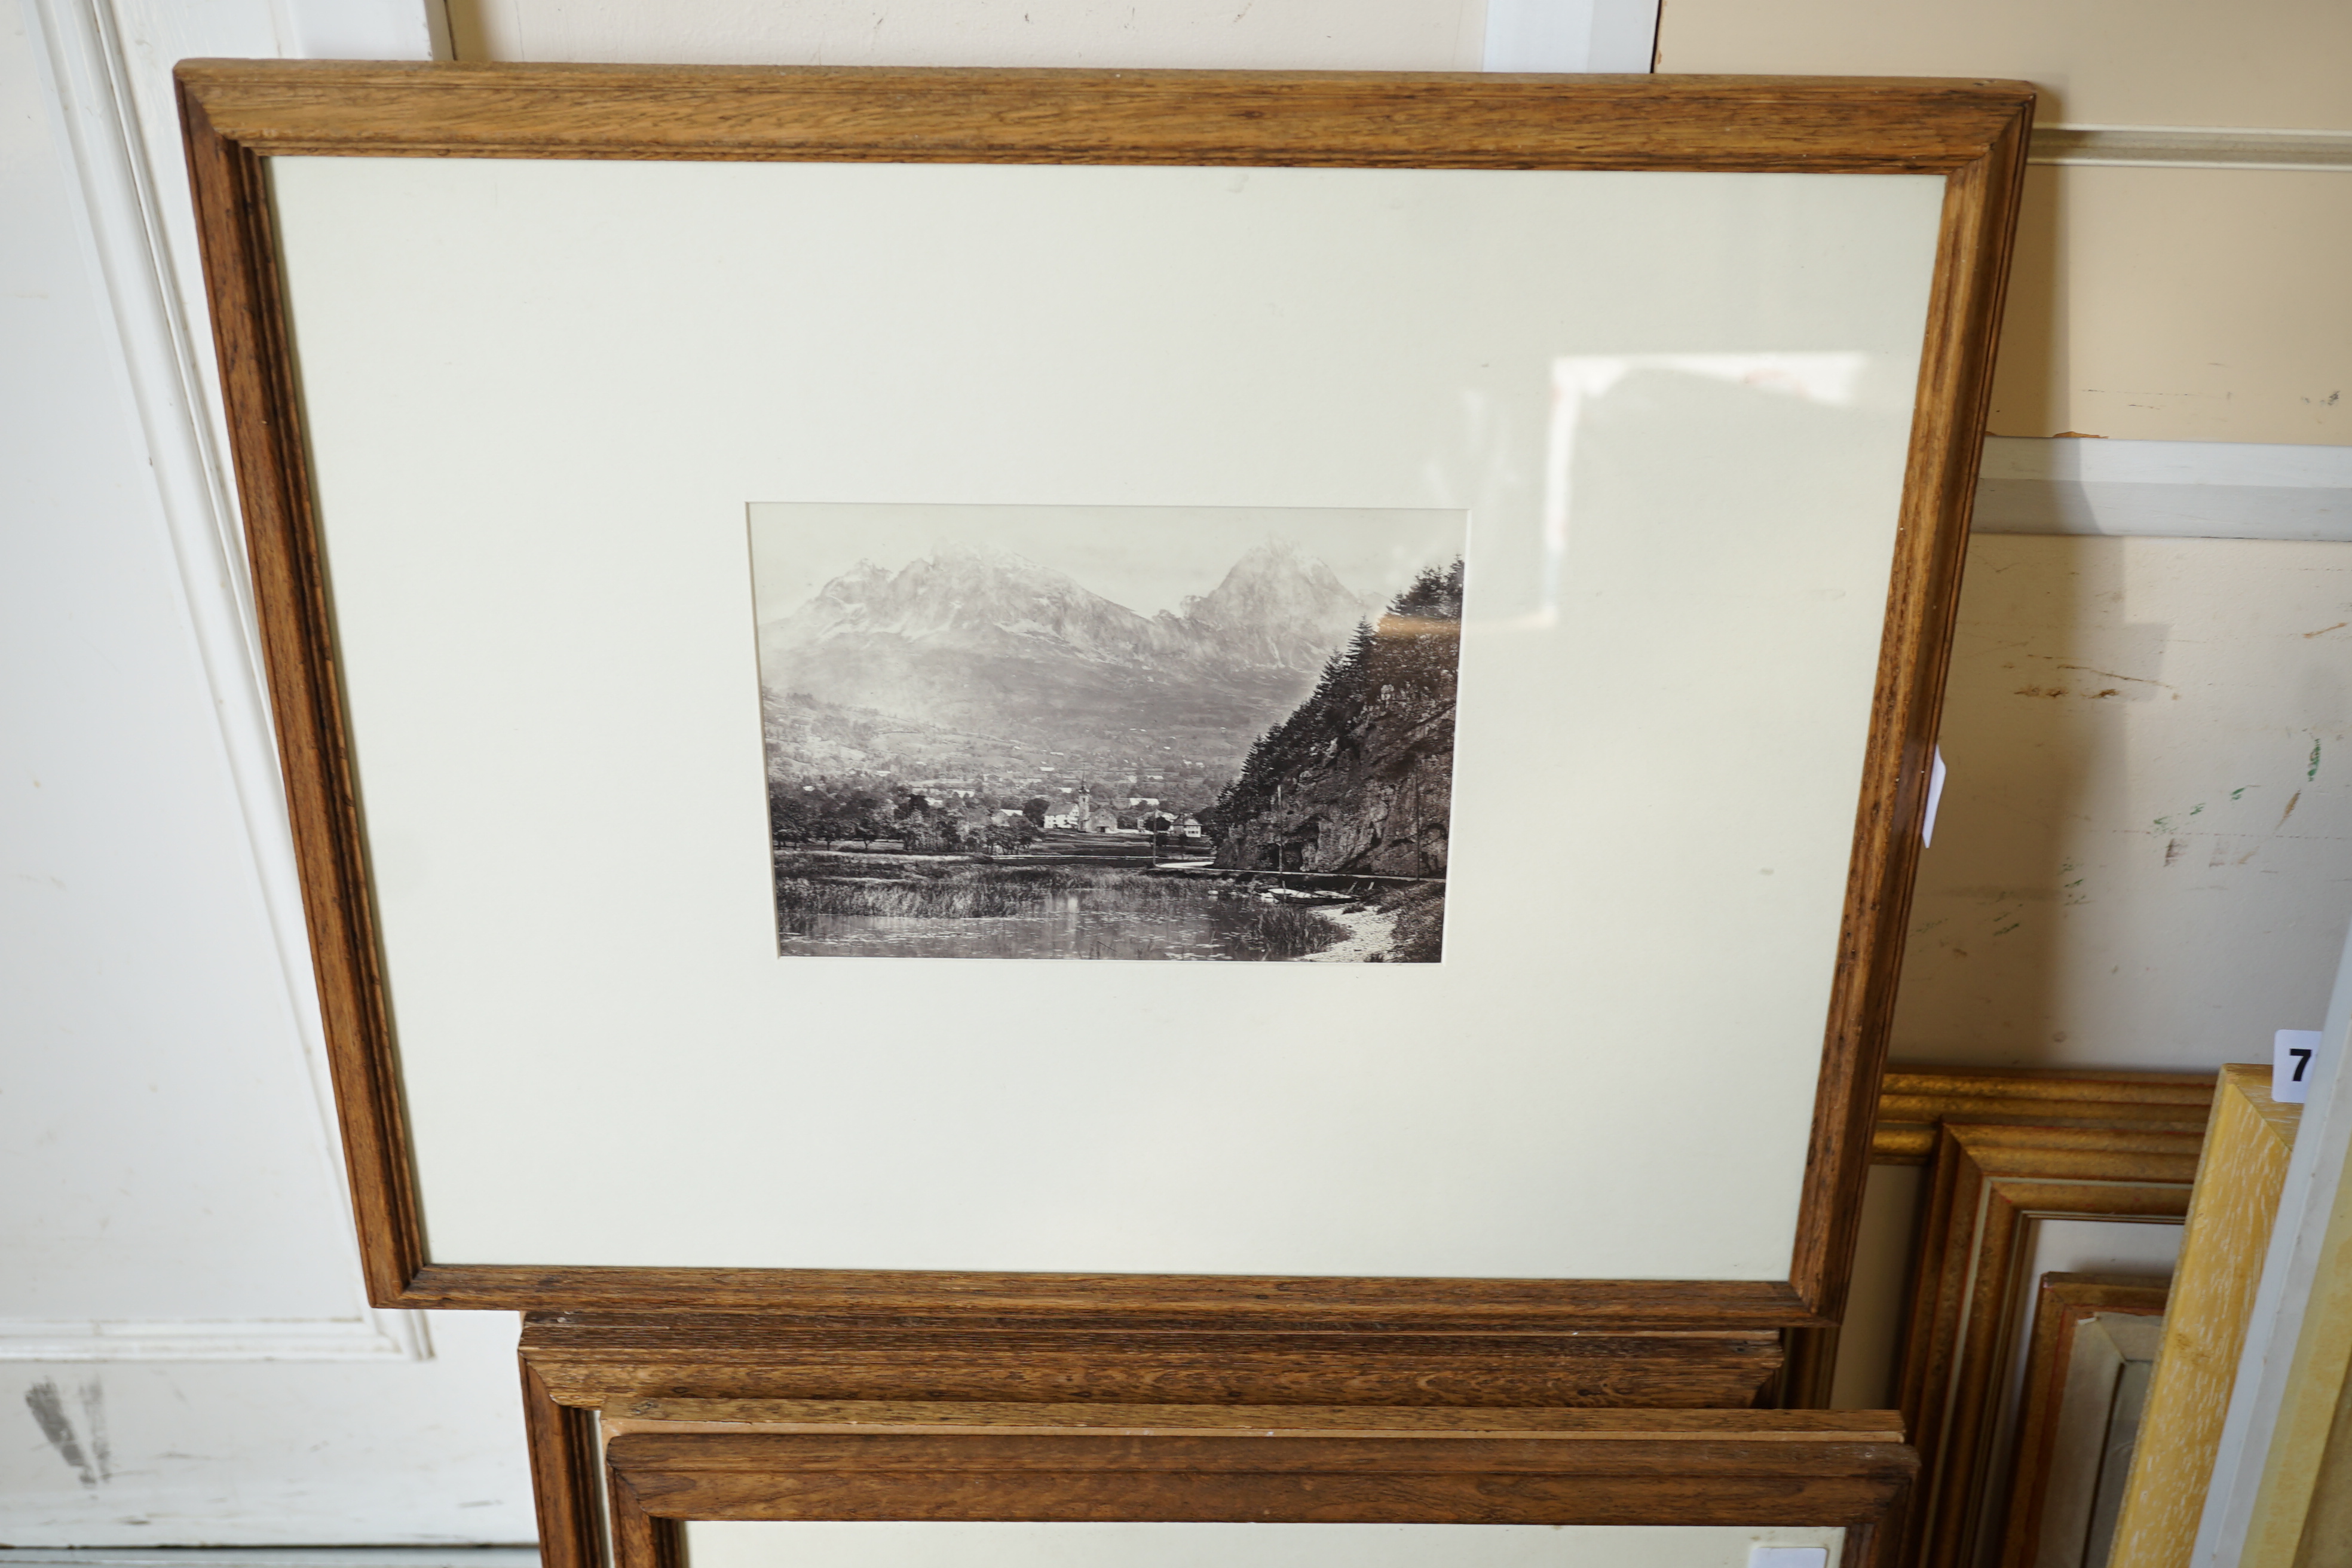 Frances Frith (1822-1898), nine black and white photographs, Lake Lowentz with the Mythen Peaks, 1867; Glaceier des Bois, Chamonix, 1867; The Jungfrau from the path to Murren, 1867; St. Moritz, Engadine, 1867, Castle of